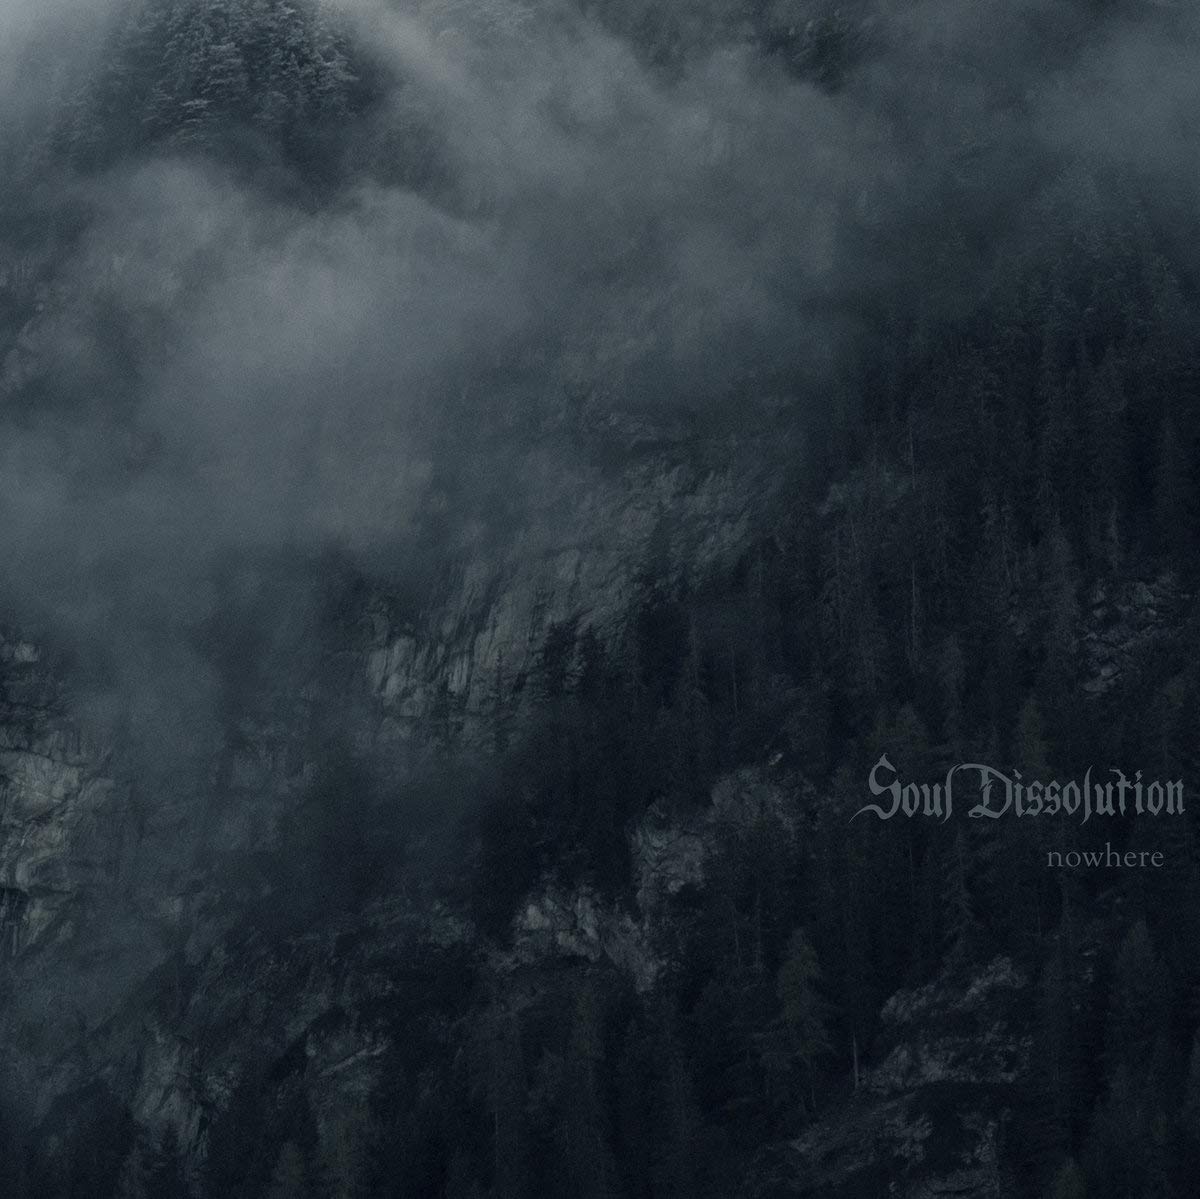 Darkness fades. Raventale. Soul dissolution - Winter contemplations (Ep).